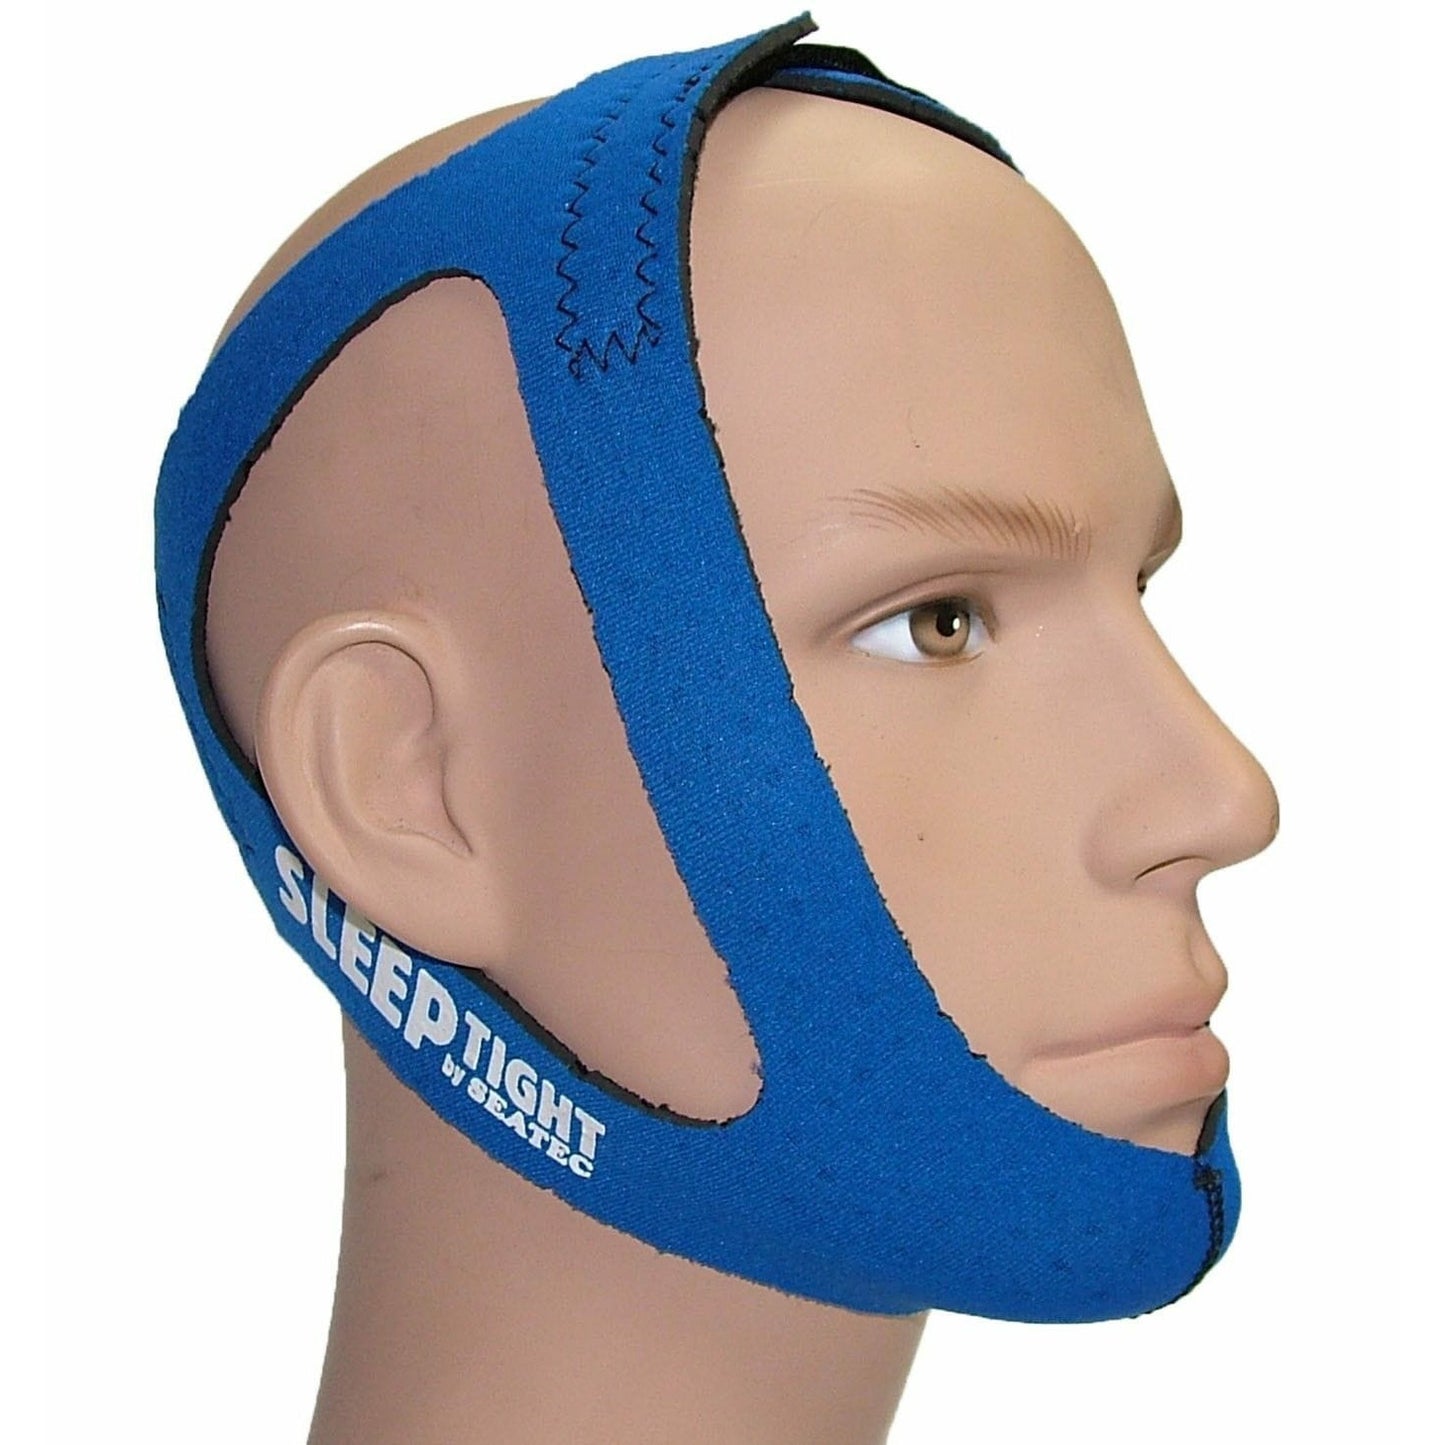 Seatec CPAP chin strap